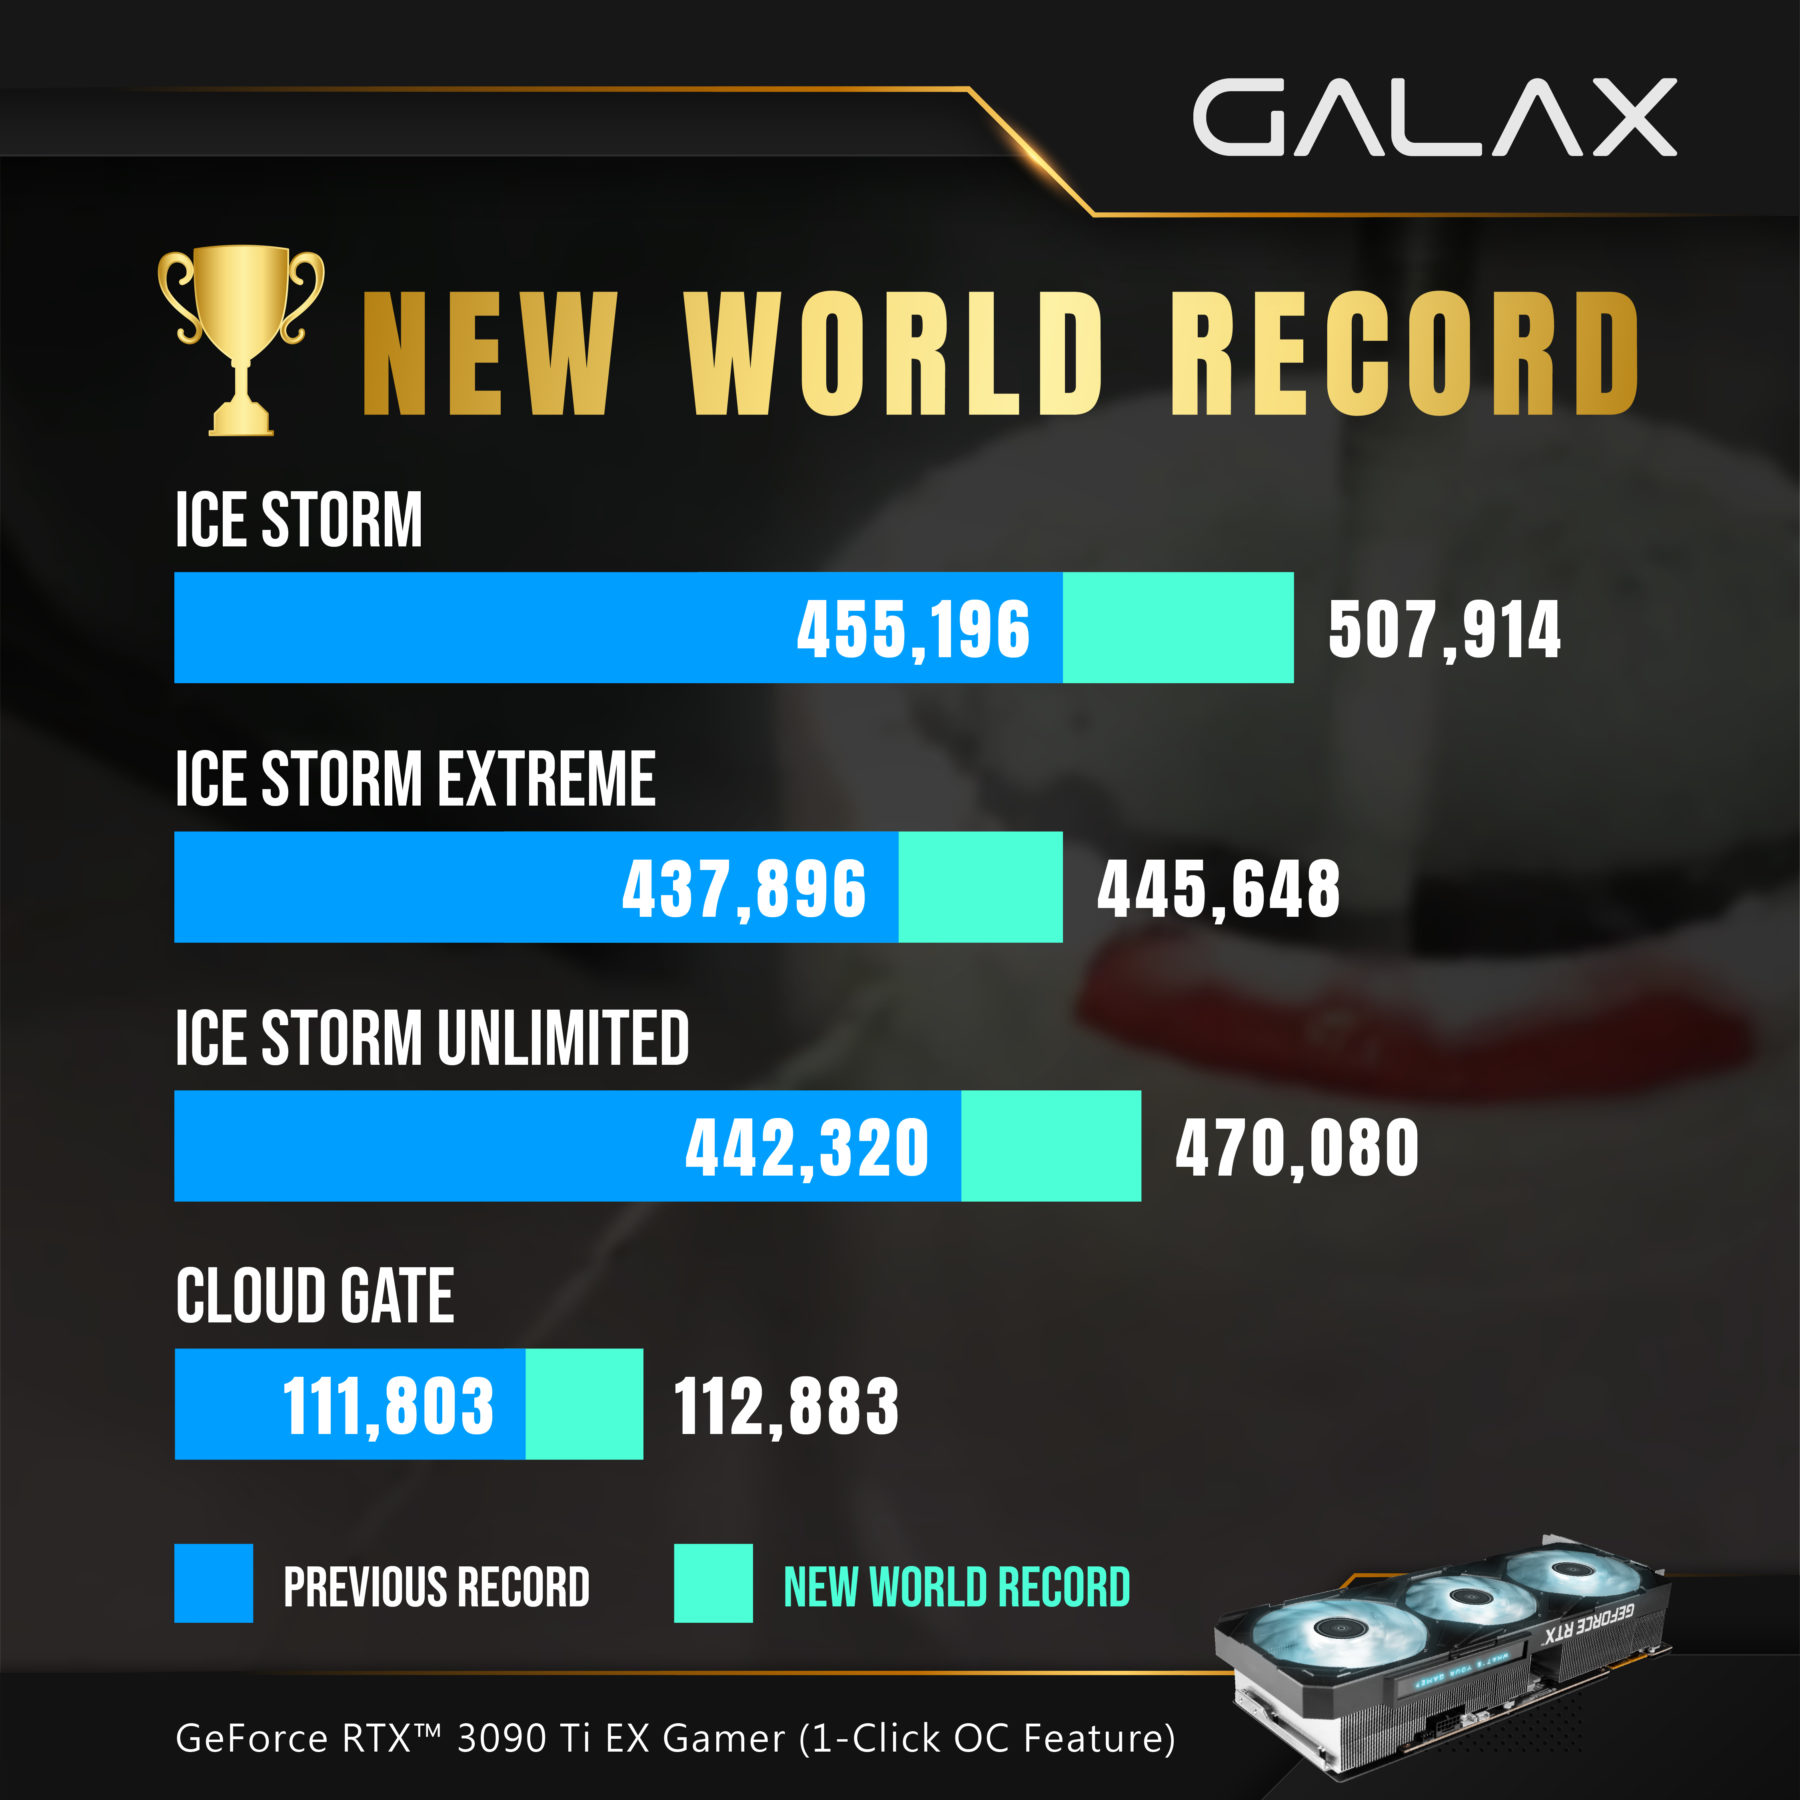 Galax Rtx 3090 Ti Breaks 7 World Records With 900W Of Extreme Overclocking Power